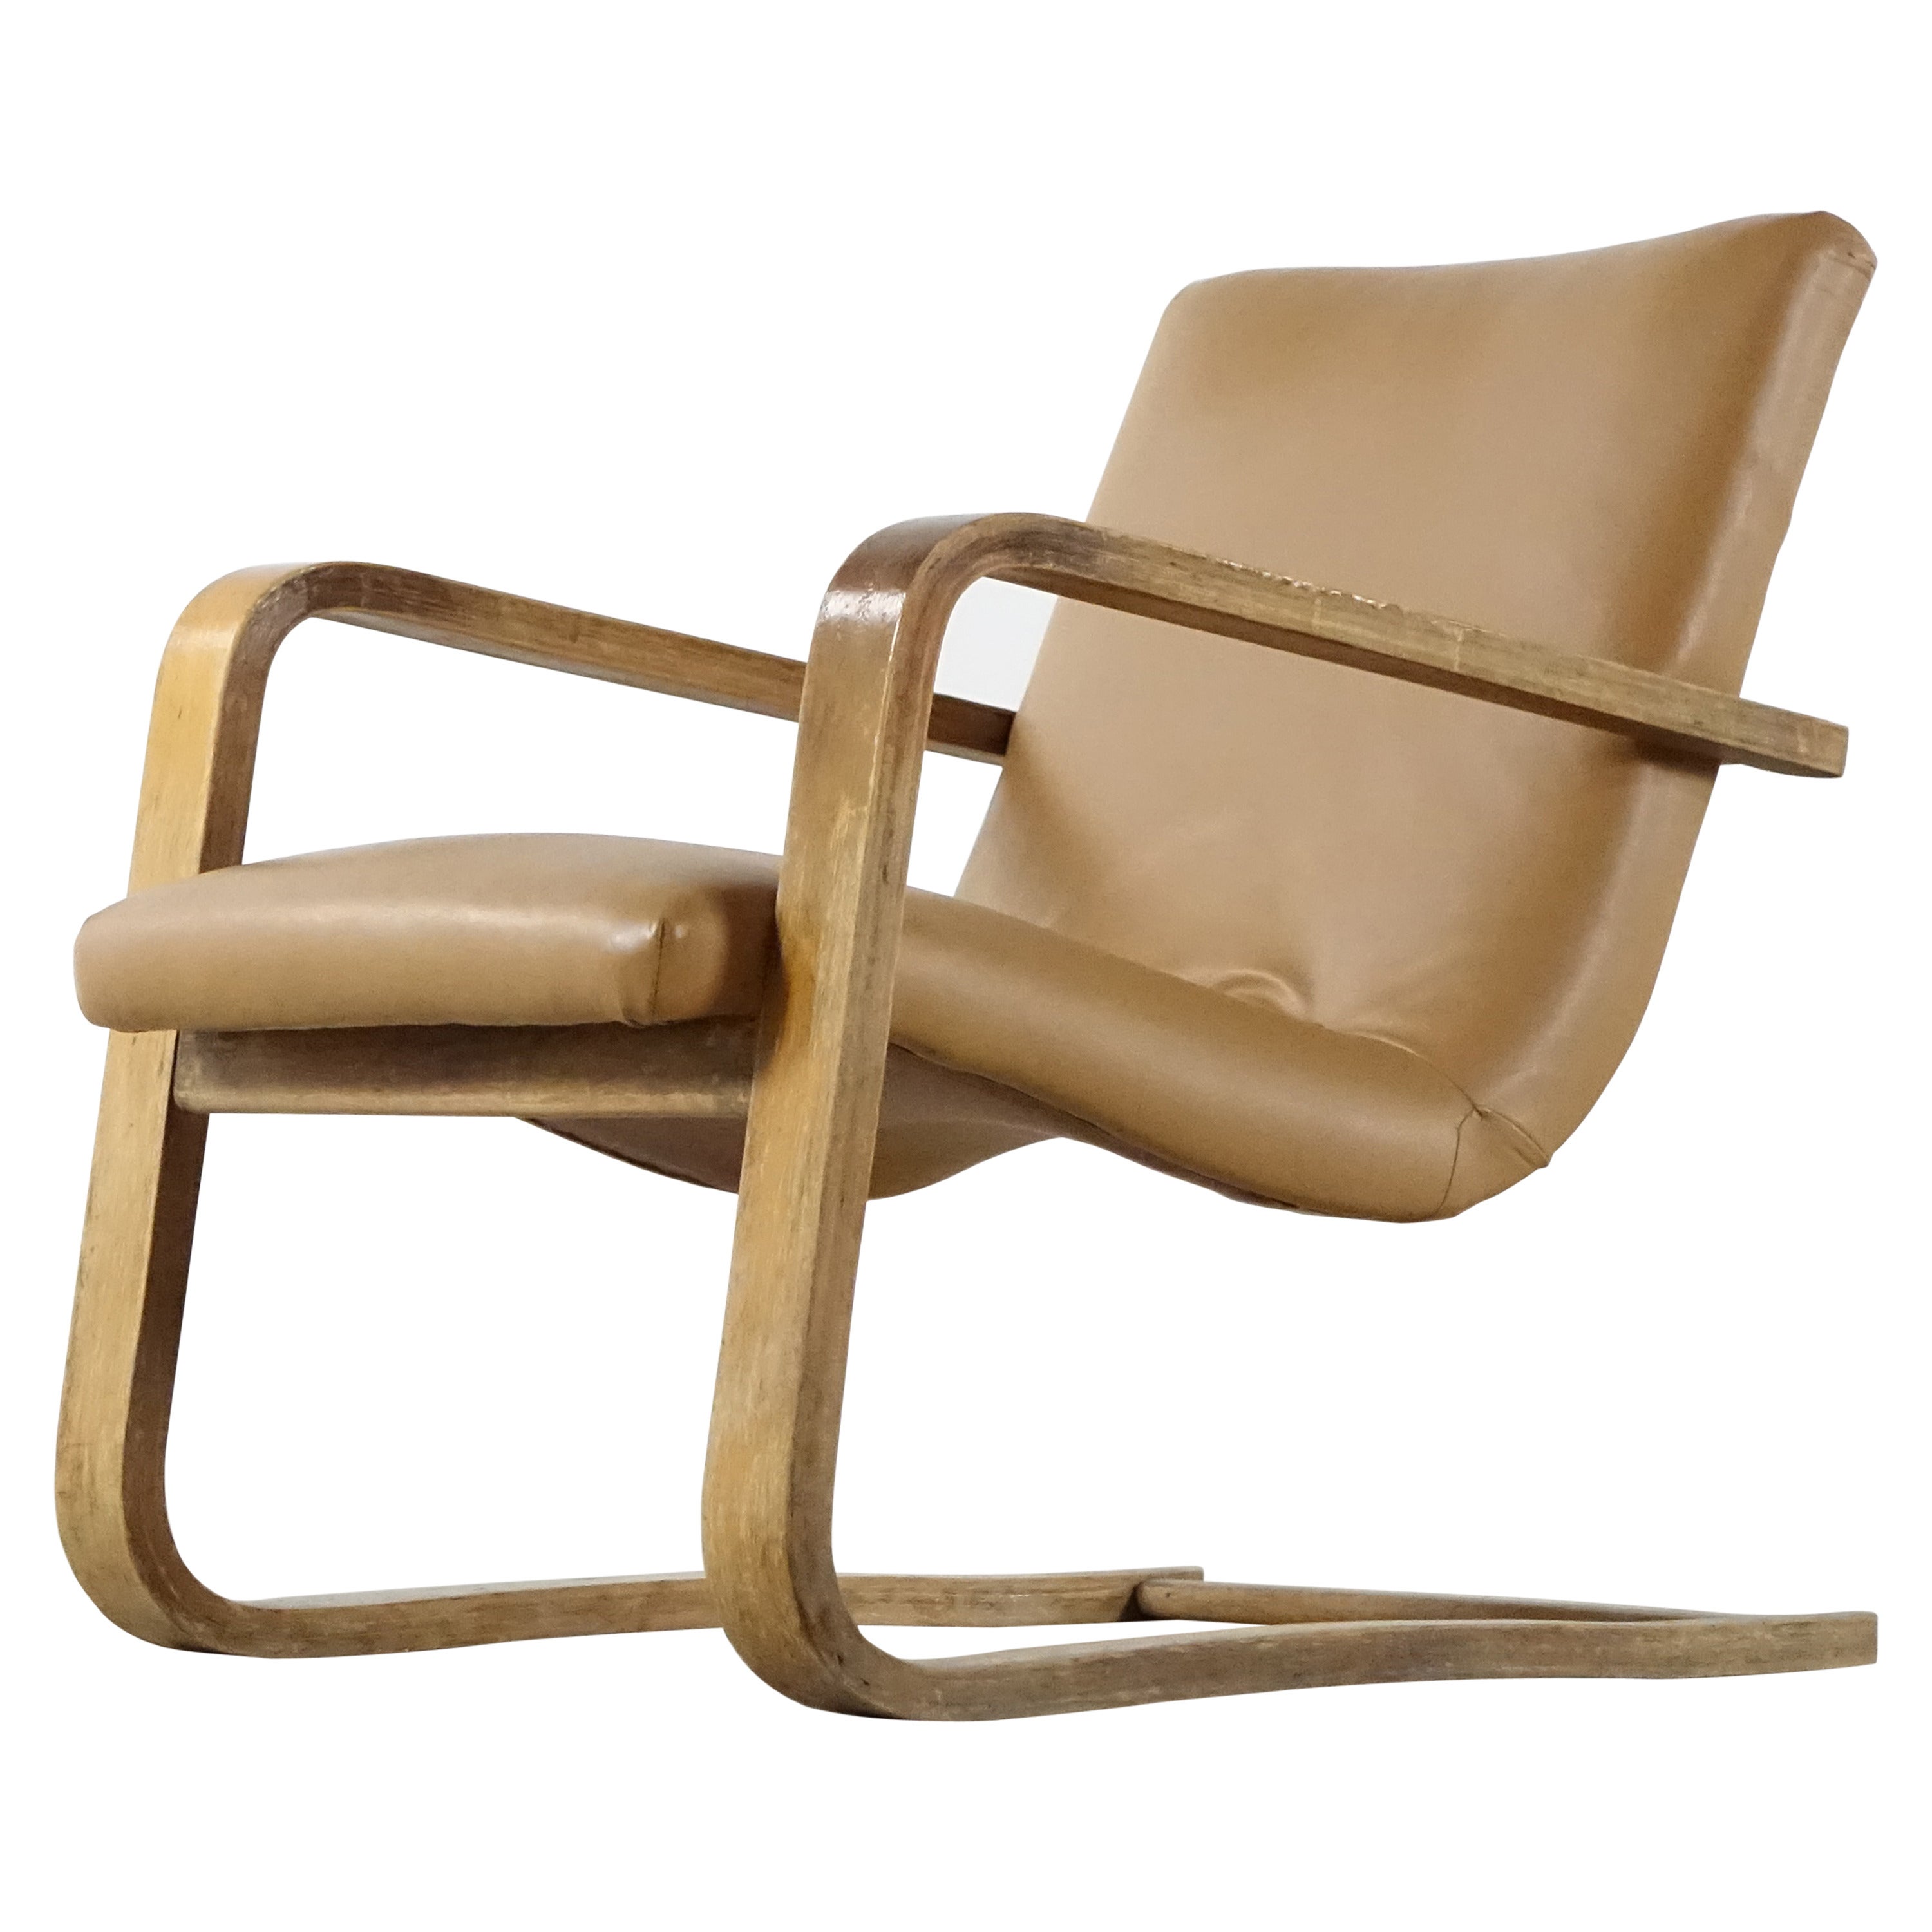 Alvar Aalto Style Elm Plywood and Bentwood Cantilever Easy Chair, 1956